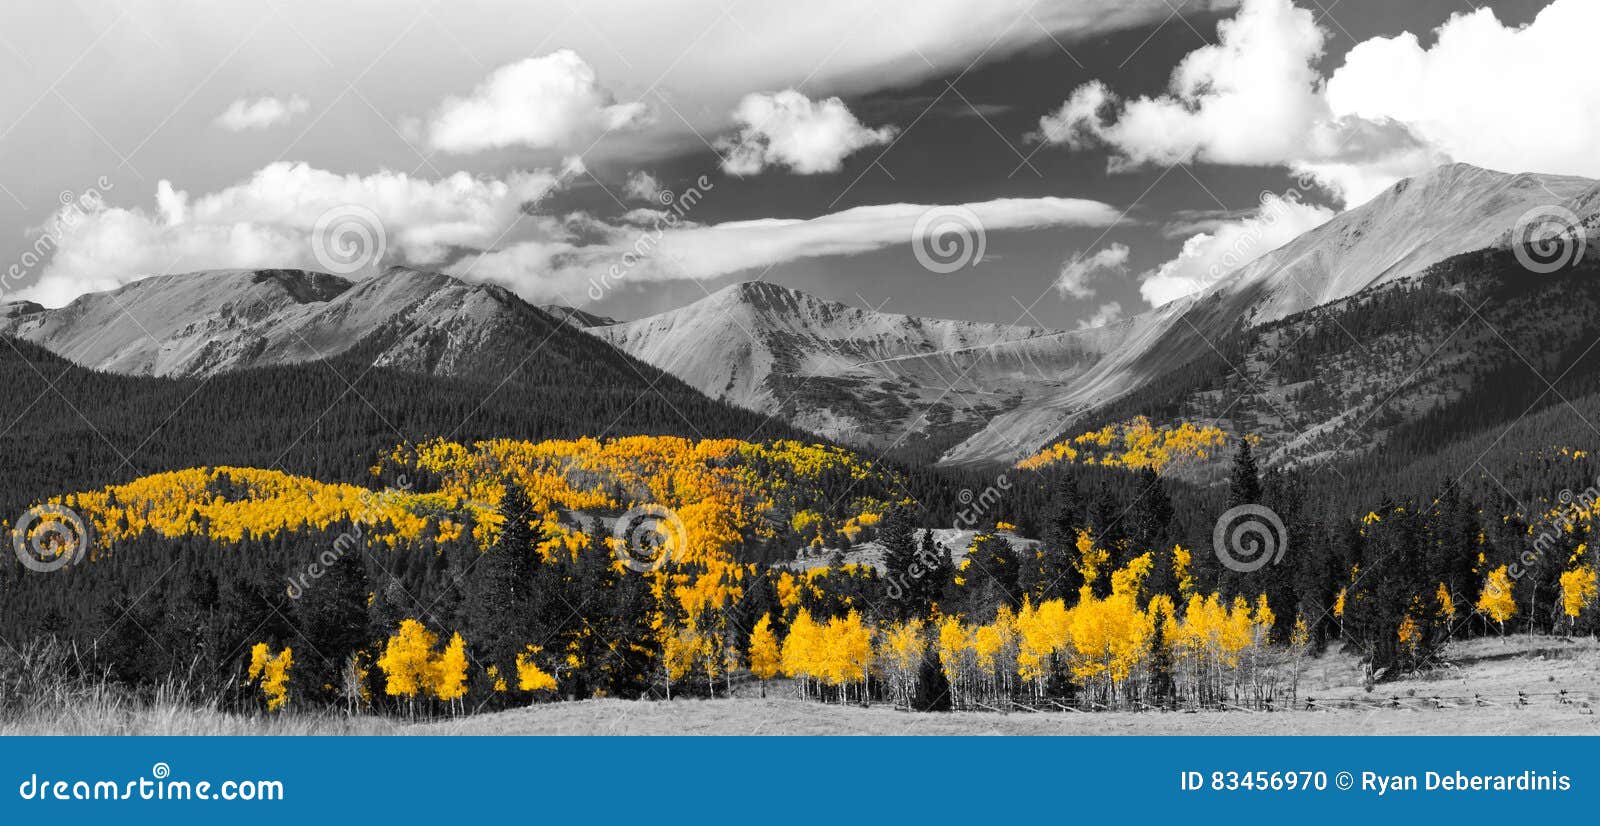 fall aspen forest in black and white panoramic mountain landscape